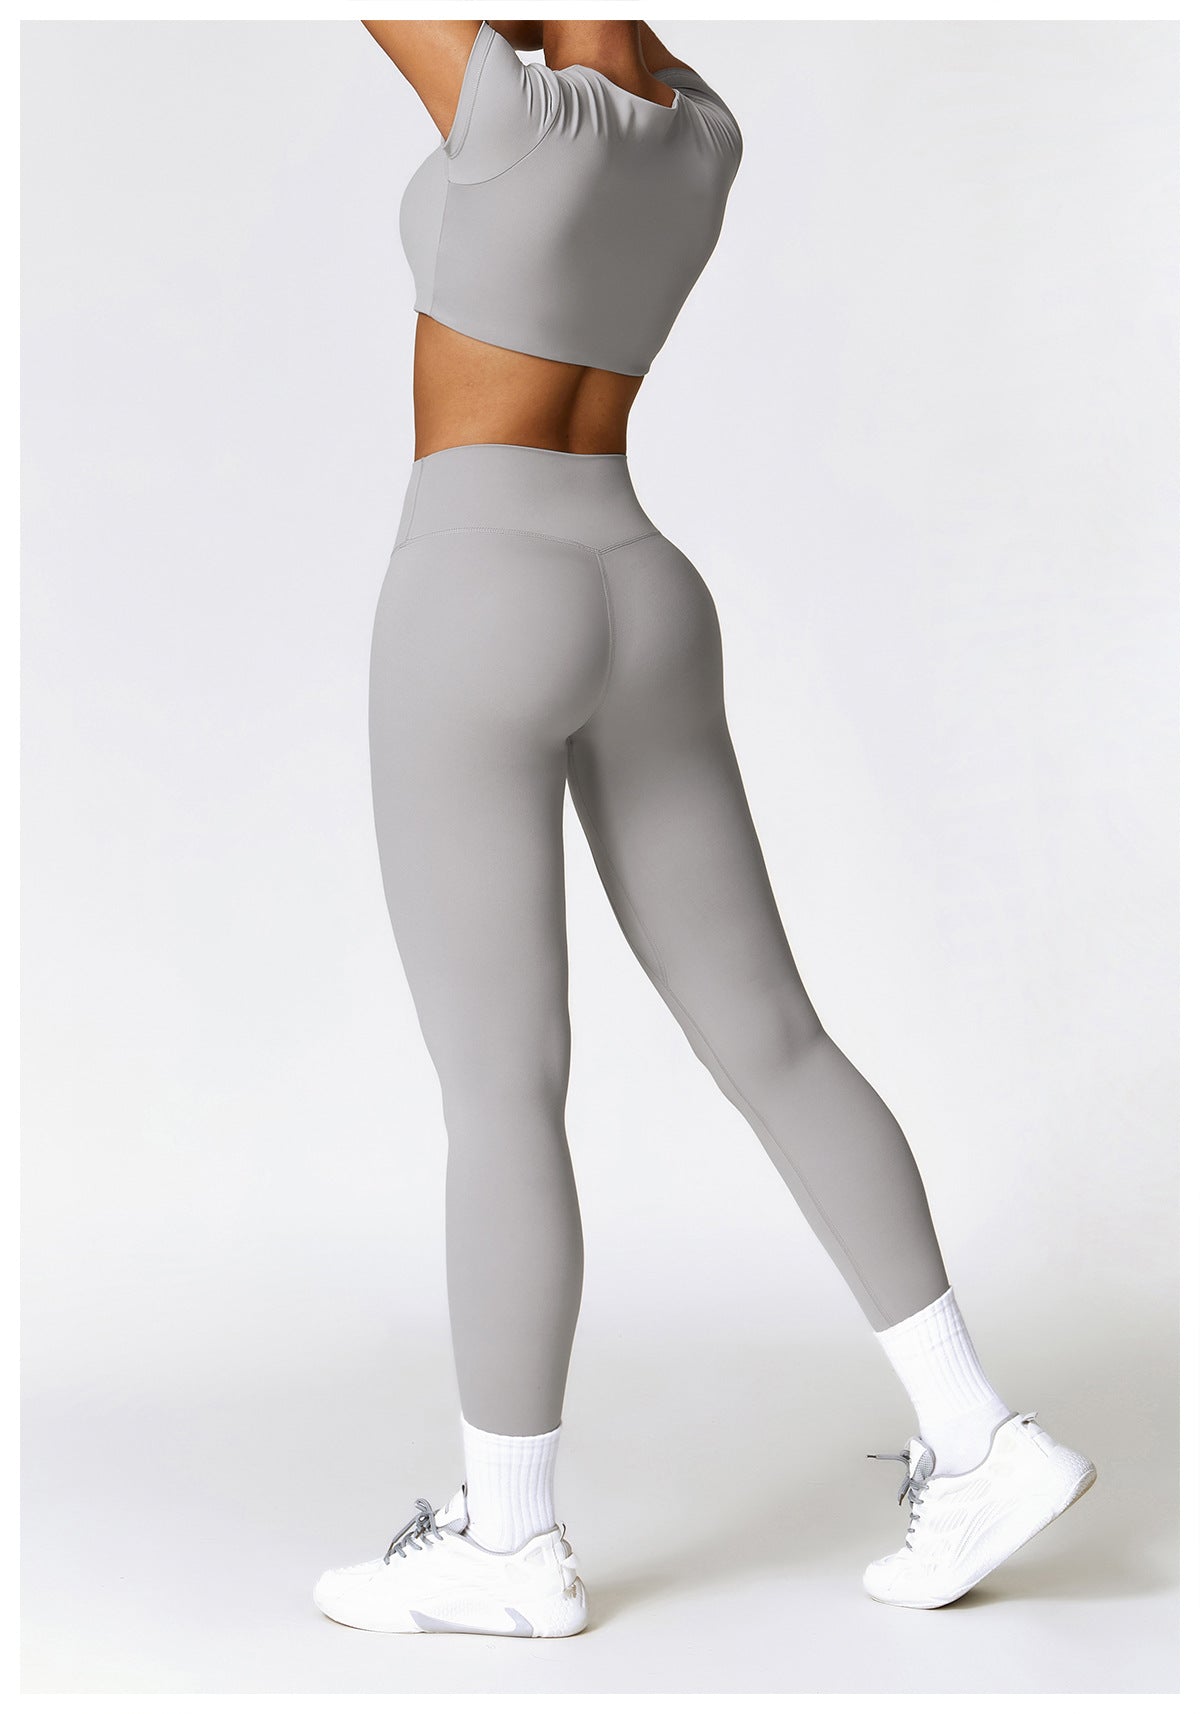 
                  
                    High Waist Hip Lift Brushed Yoga Pants Women Running Quick Drying Fitness Pants Outer Wear Slimming Tight Sports Pants
                  
                